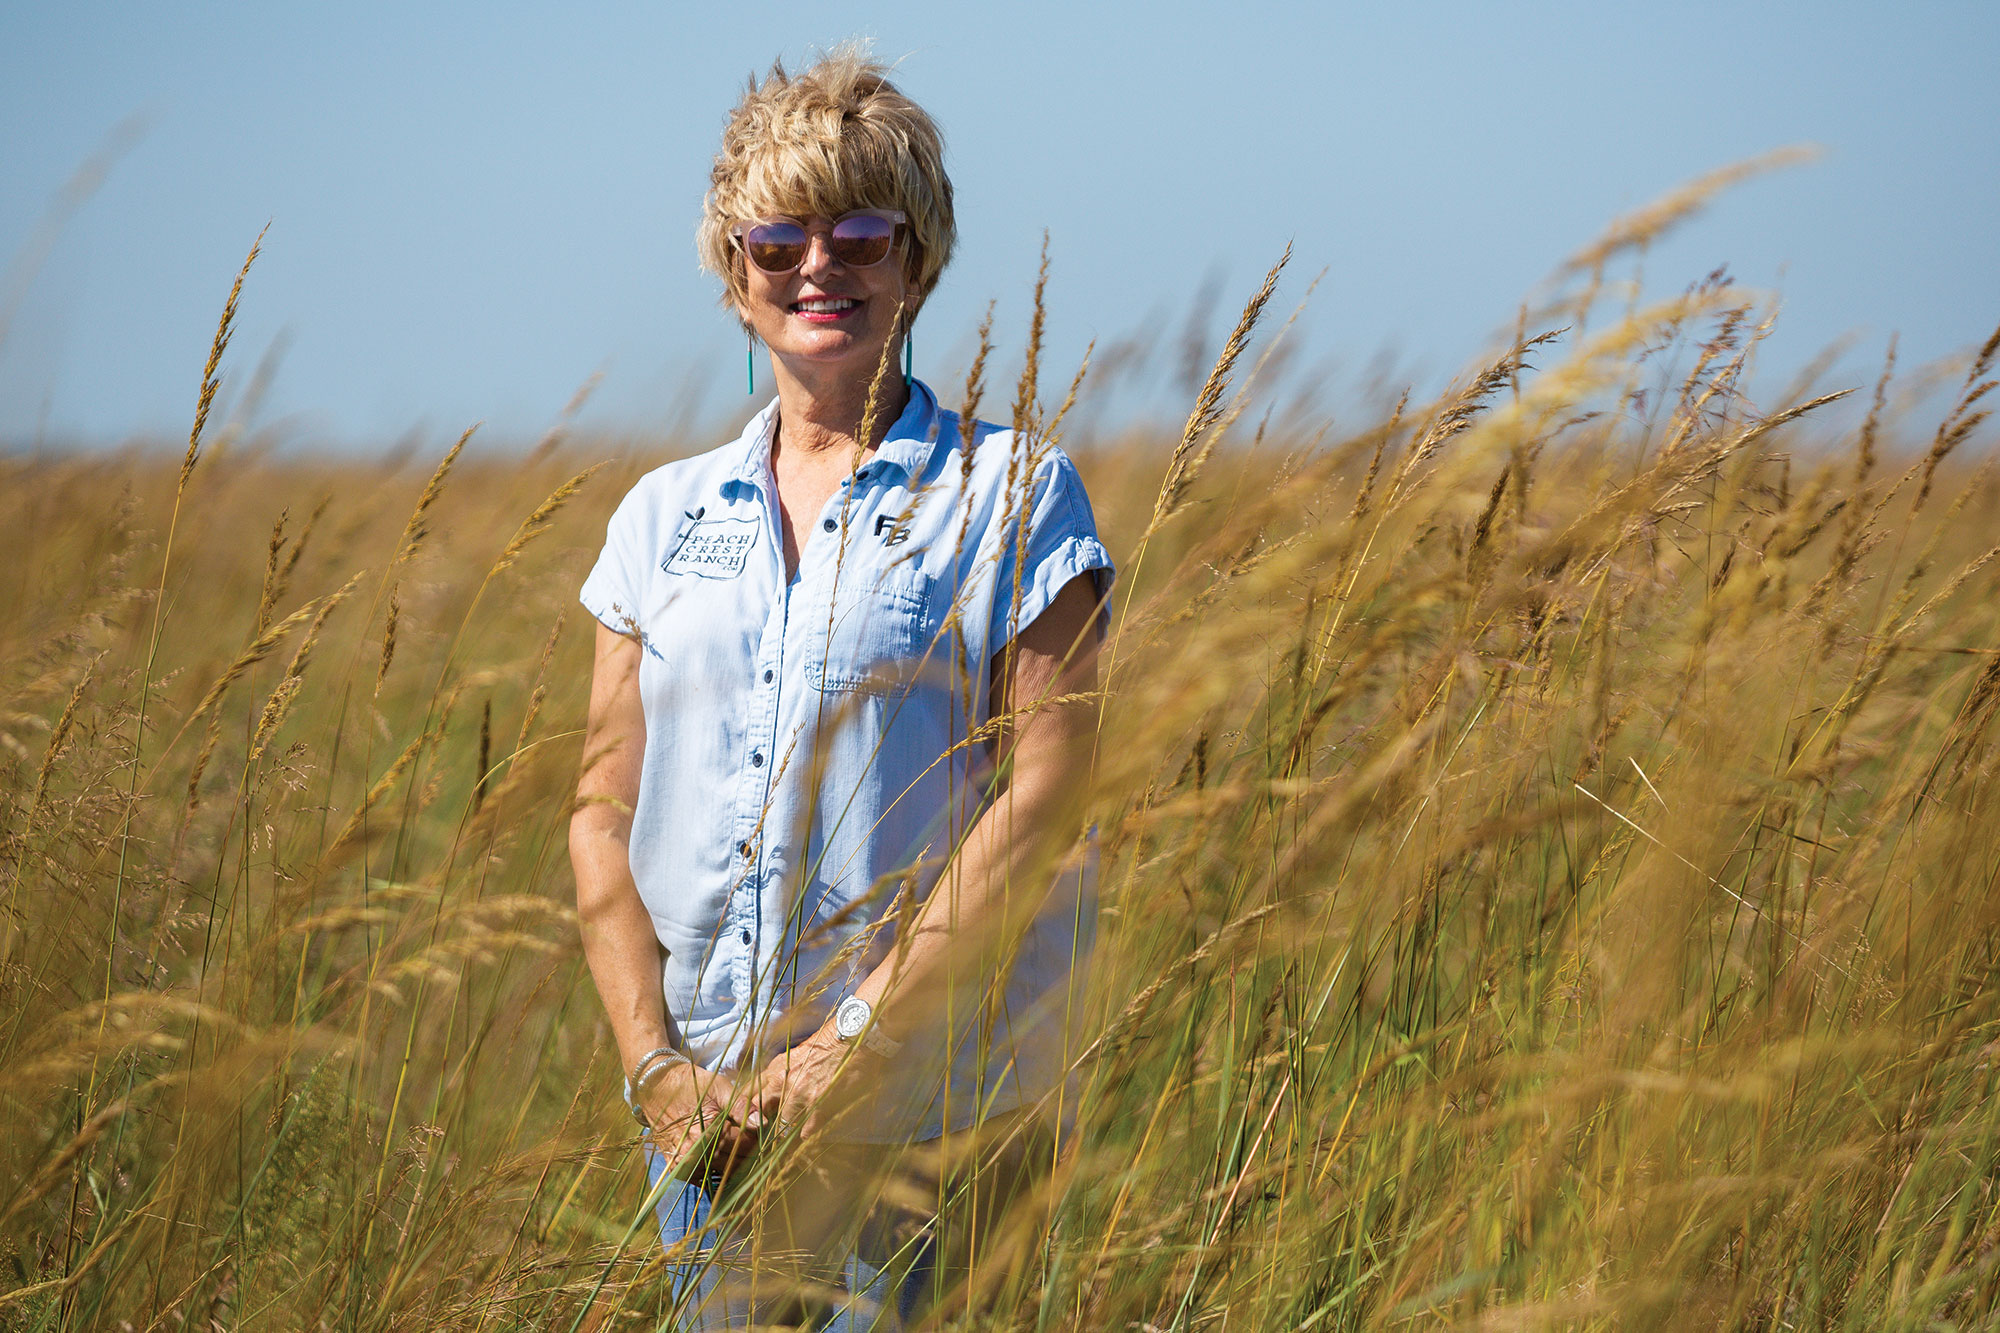 Susan Bergen focuses on building soil health and improving the land on her ranch in Sulphur, Oklahoma.